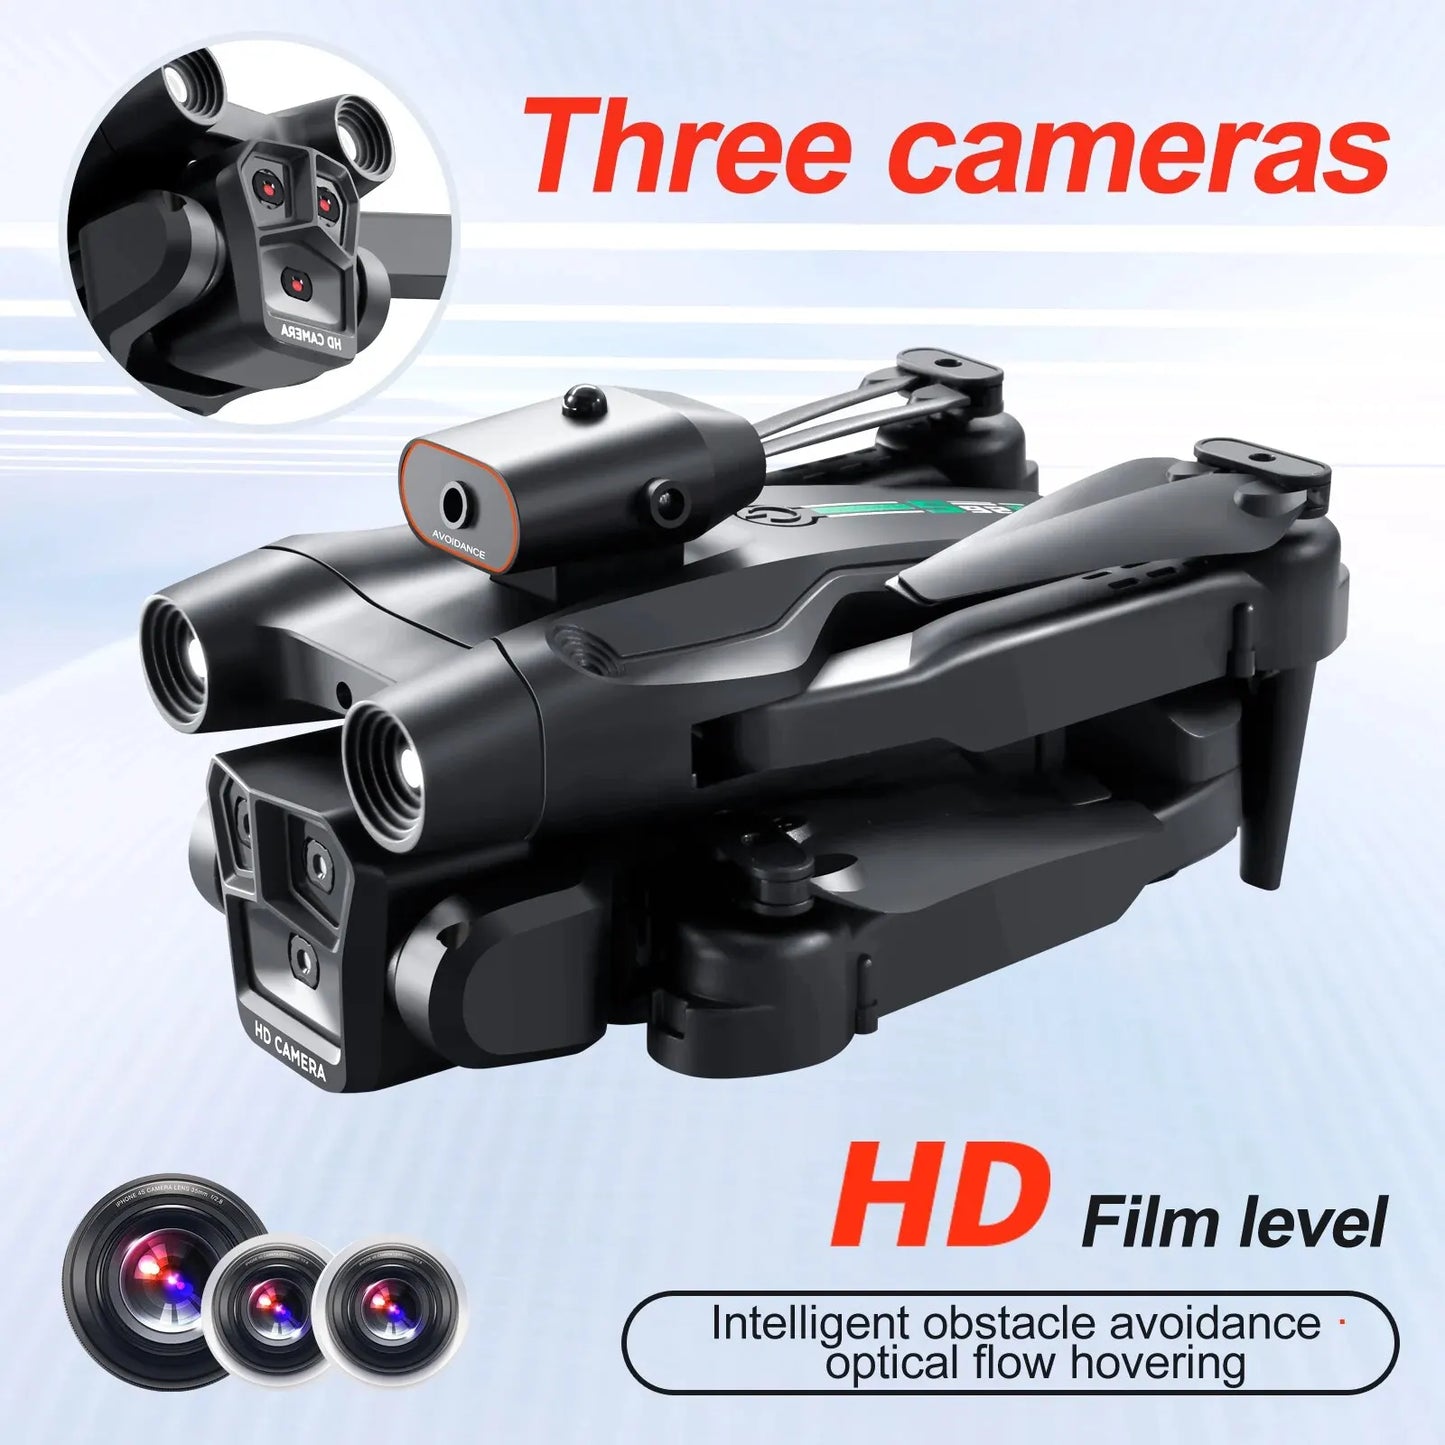 S92 Drone, three cameras QH Ho HD Film level Intelligetcab obstacle